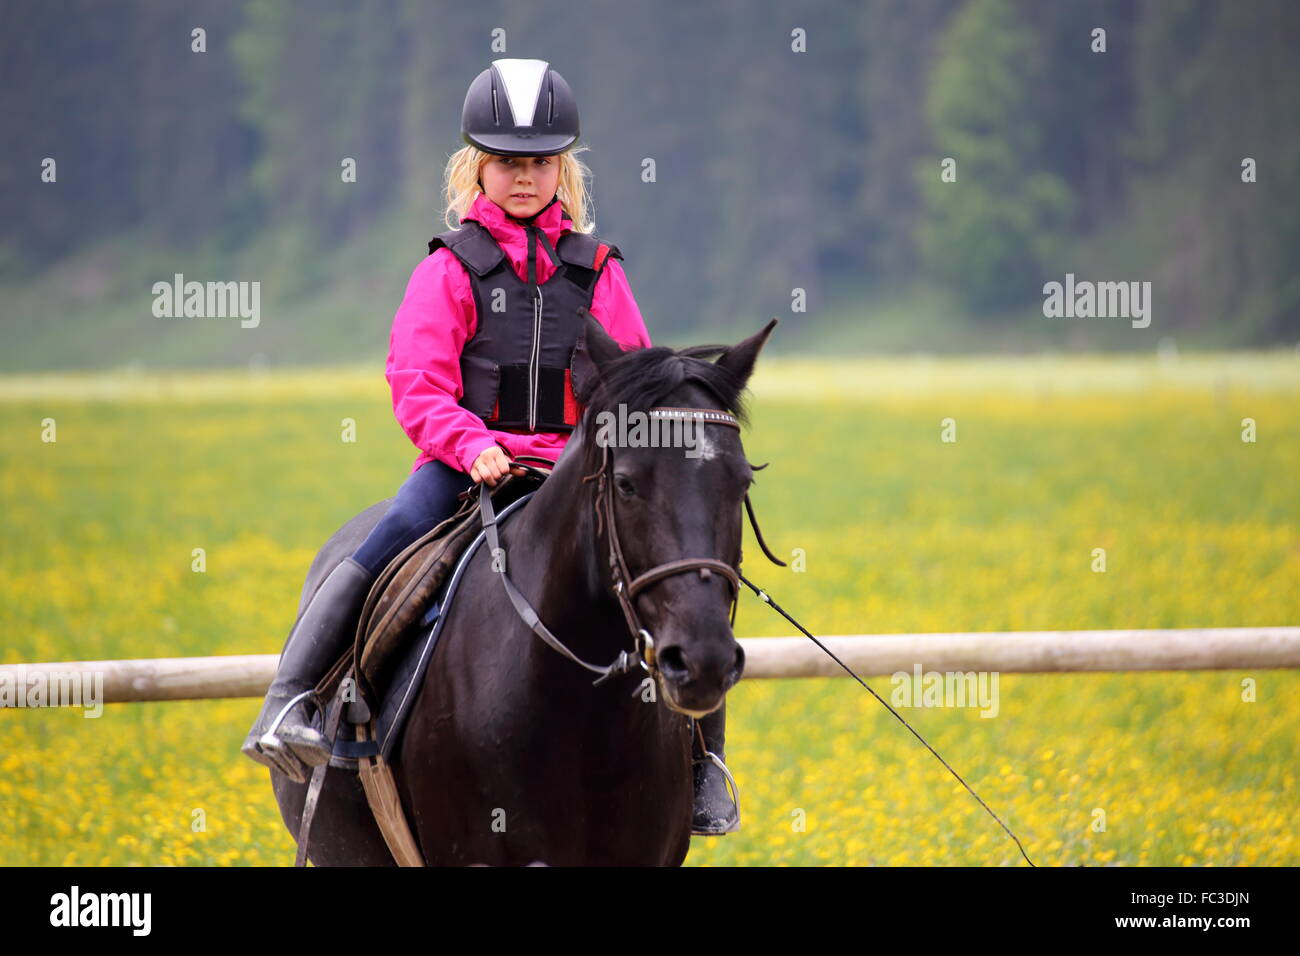 young girl on horse back Stock Photo